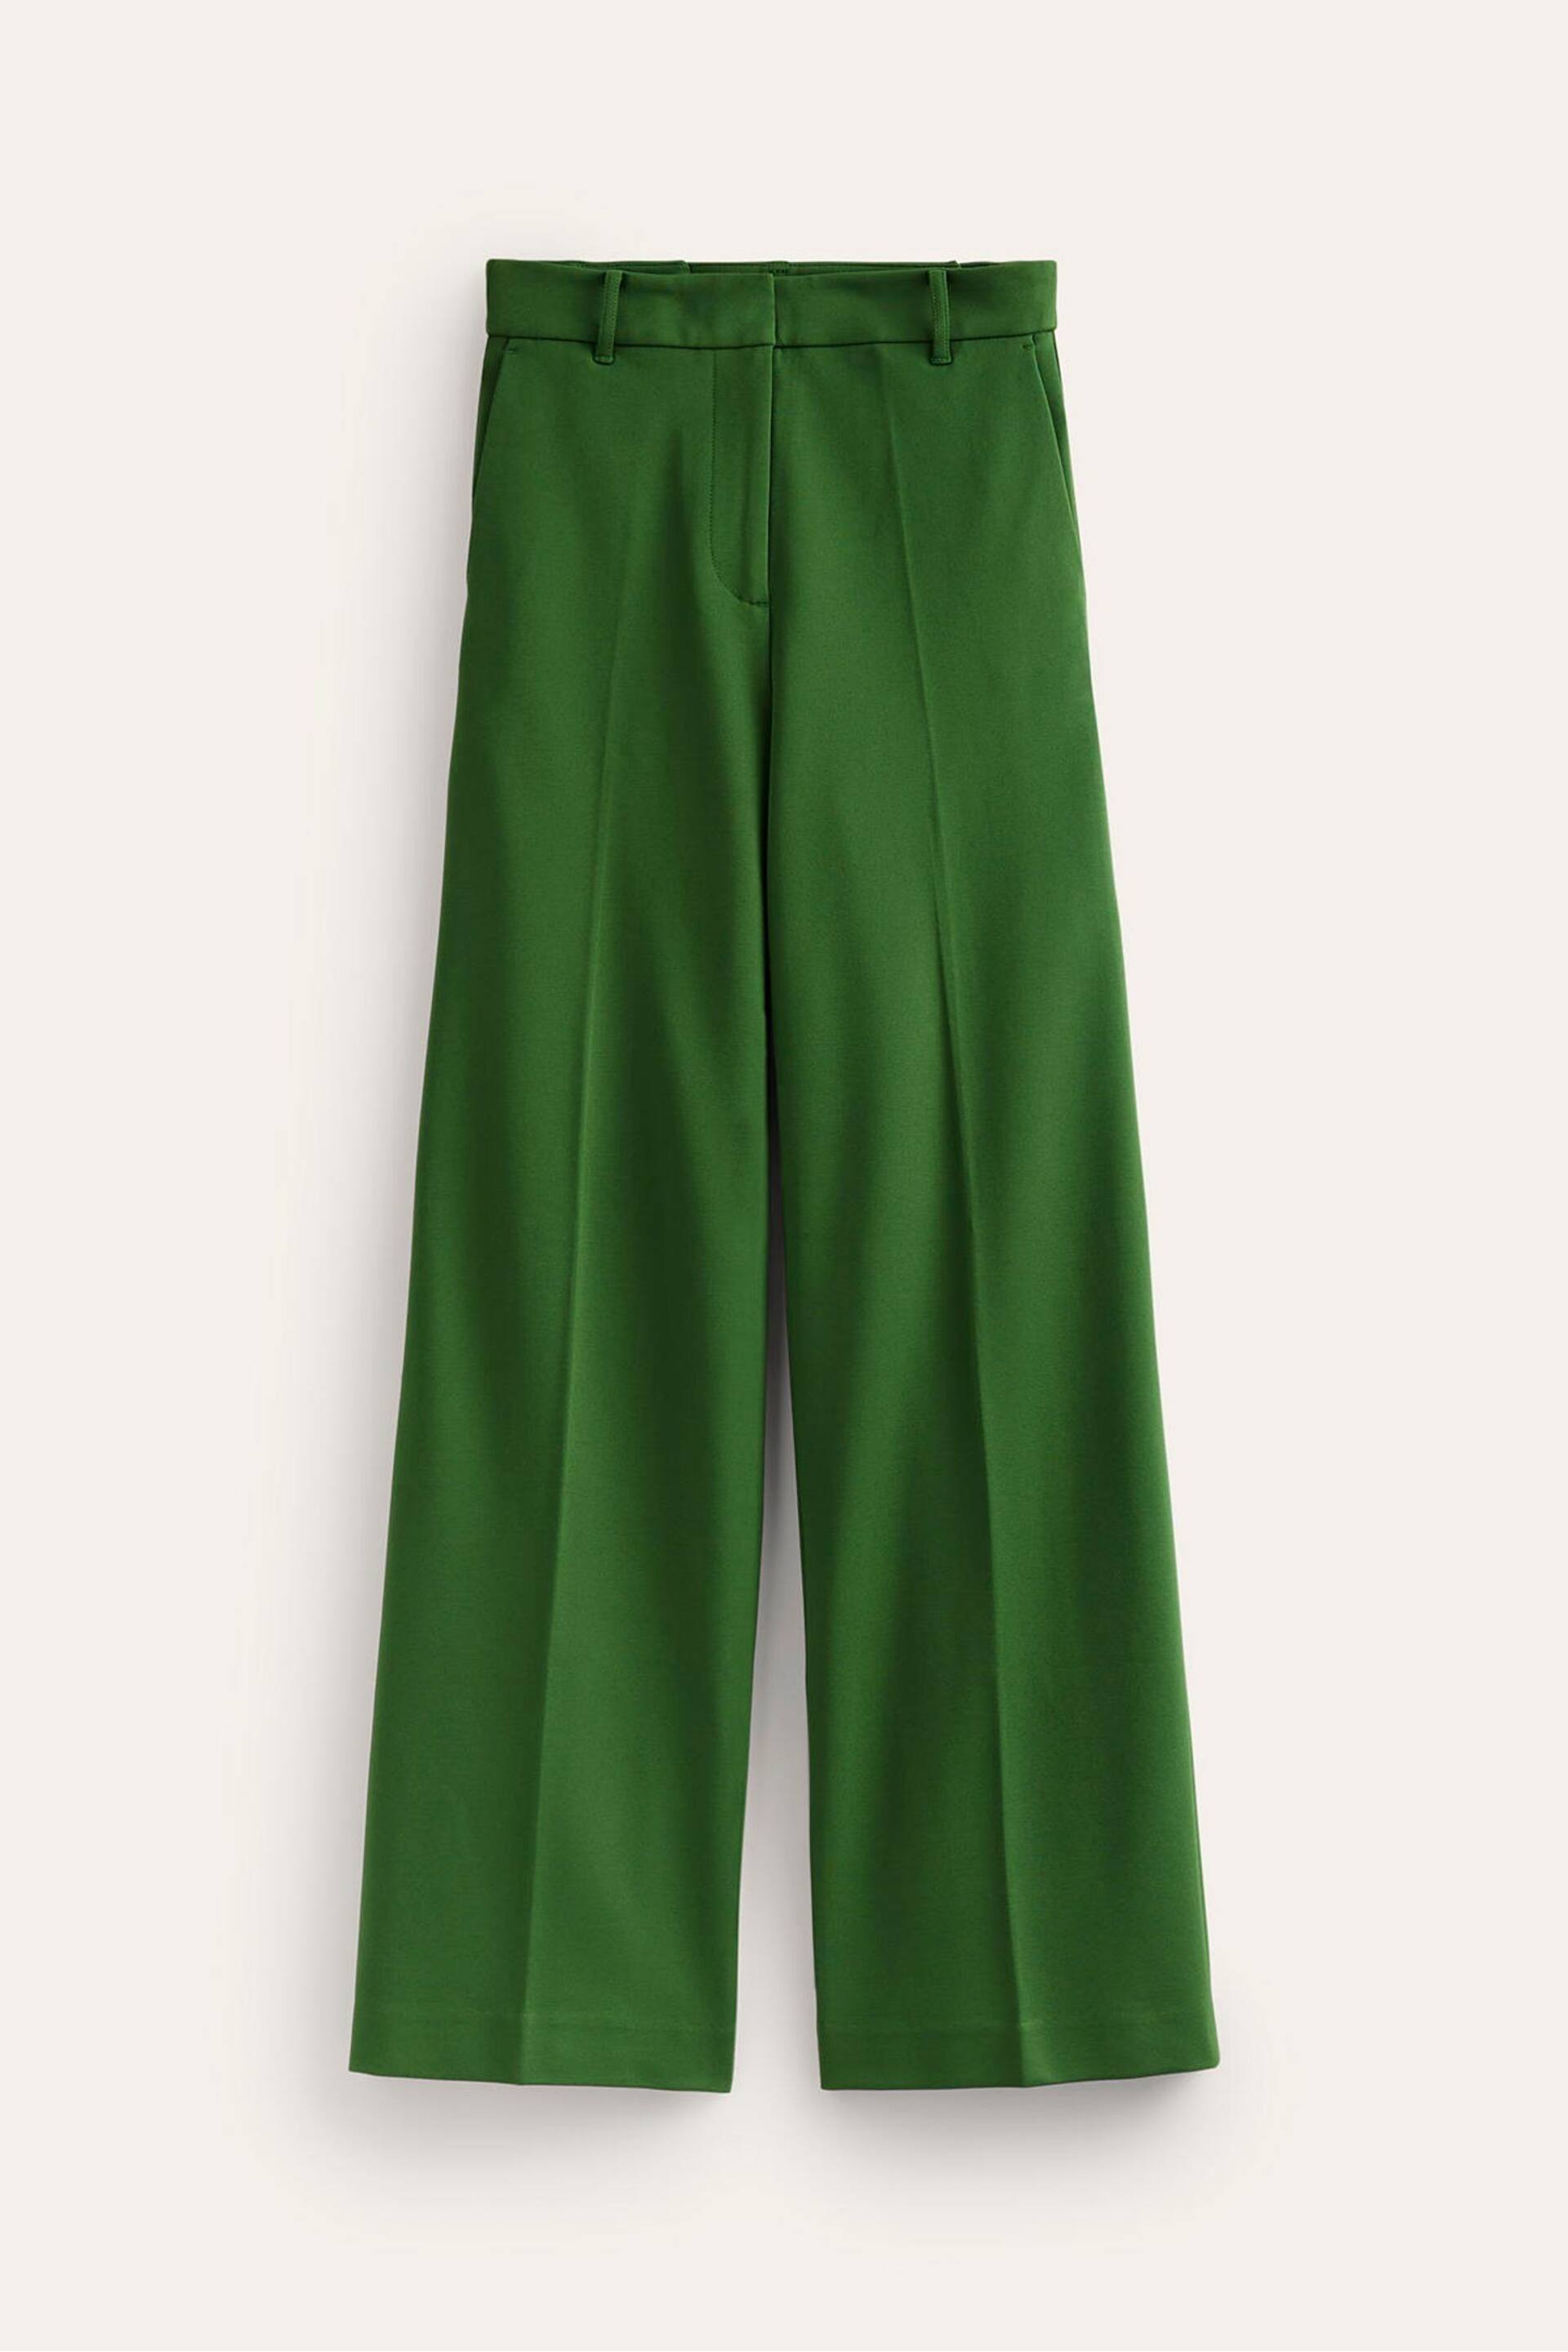 Boden Green Westbourne Ponte Trousers - Image 5 of 5